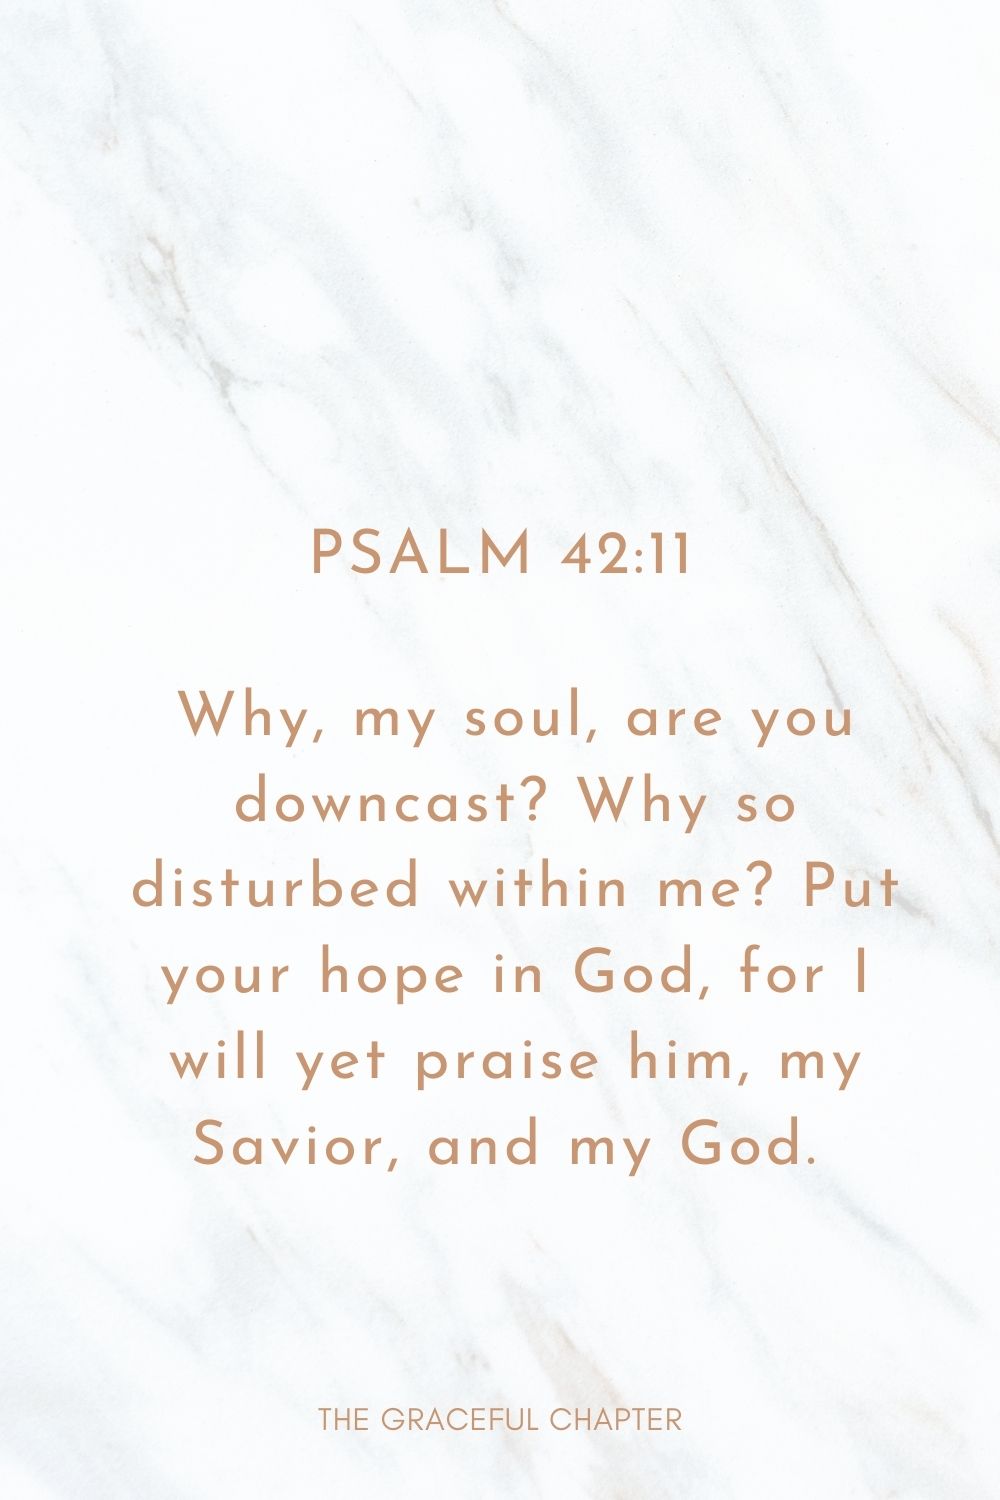 Why, my soul, are you downcast? Why so disturbed within me? Put your hope in God, for I will yet praise him, my Savior, and my God.  Psalm 42:11